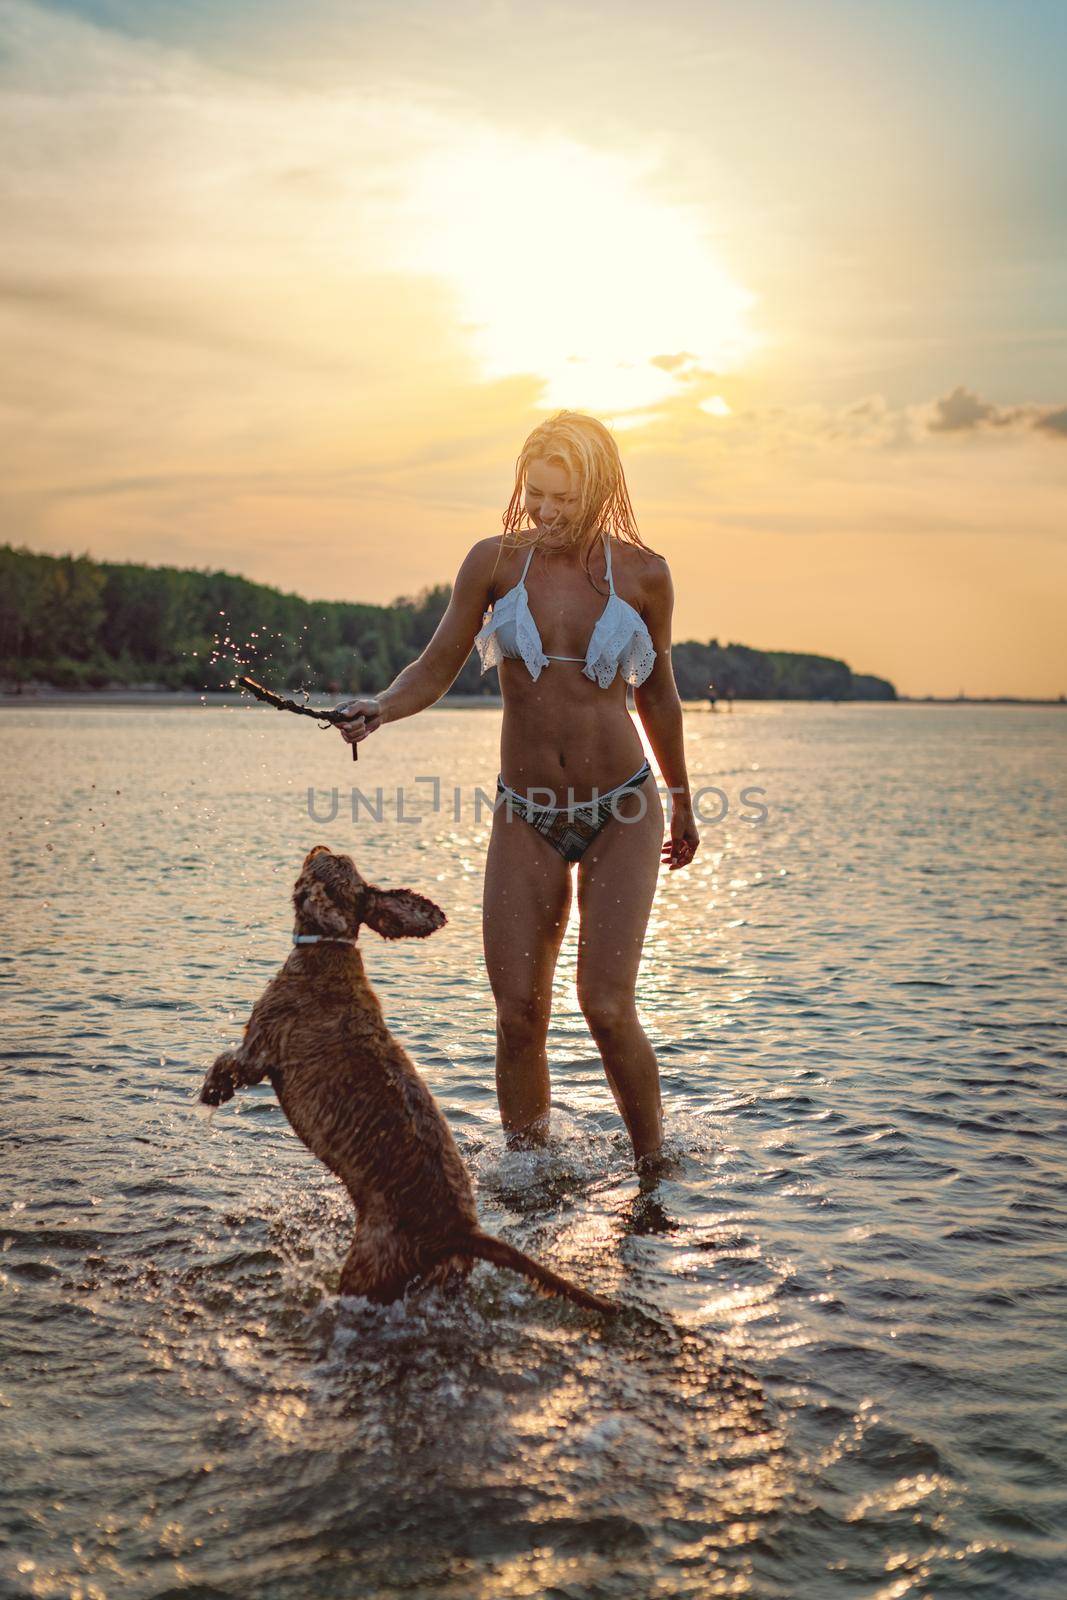 A young happy woman has a great time at the beach. She is standing the water and playing with her dog. Sunset over water.